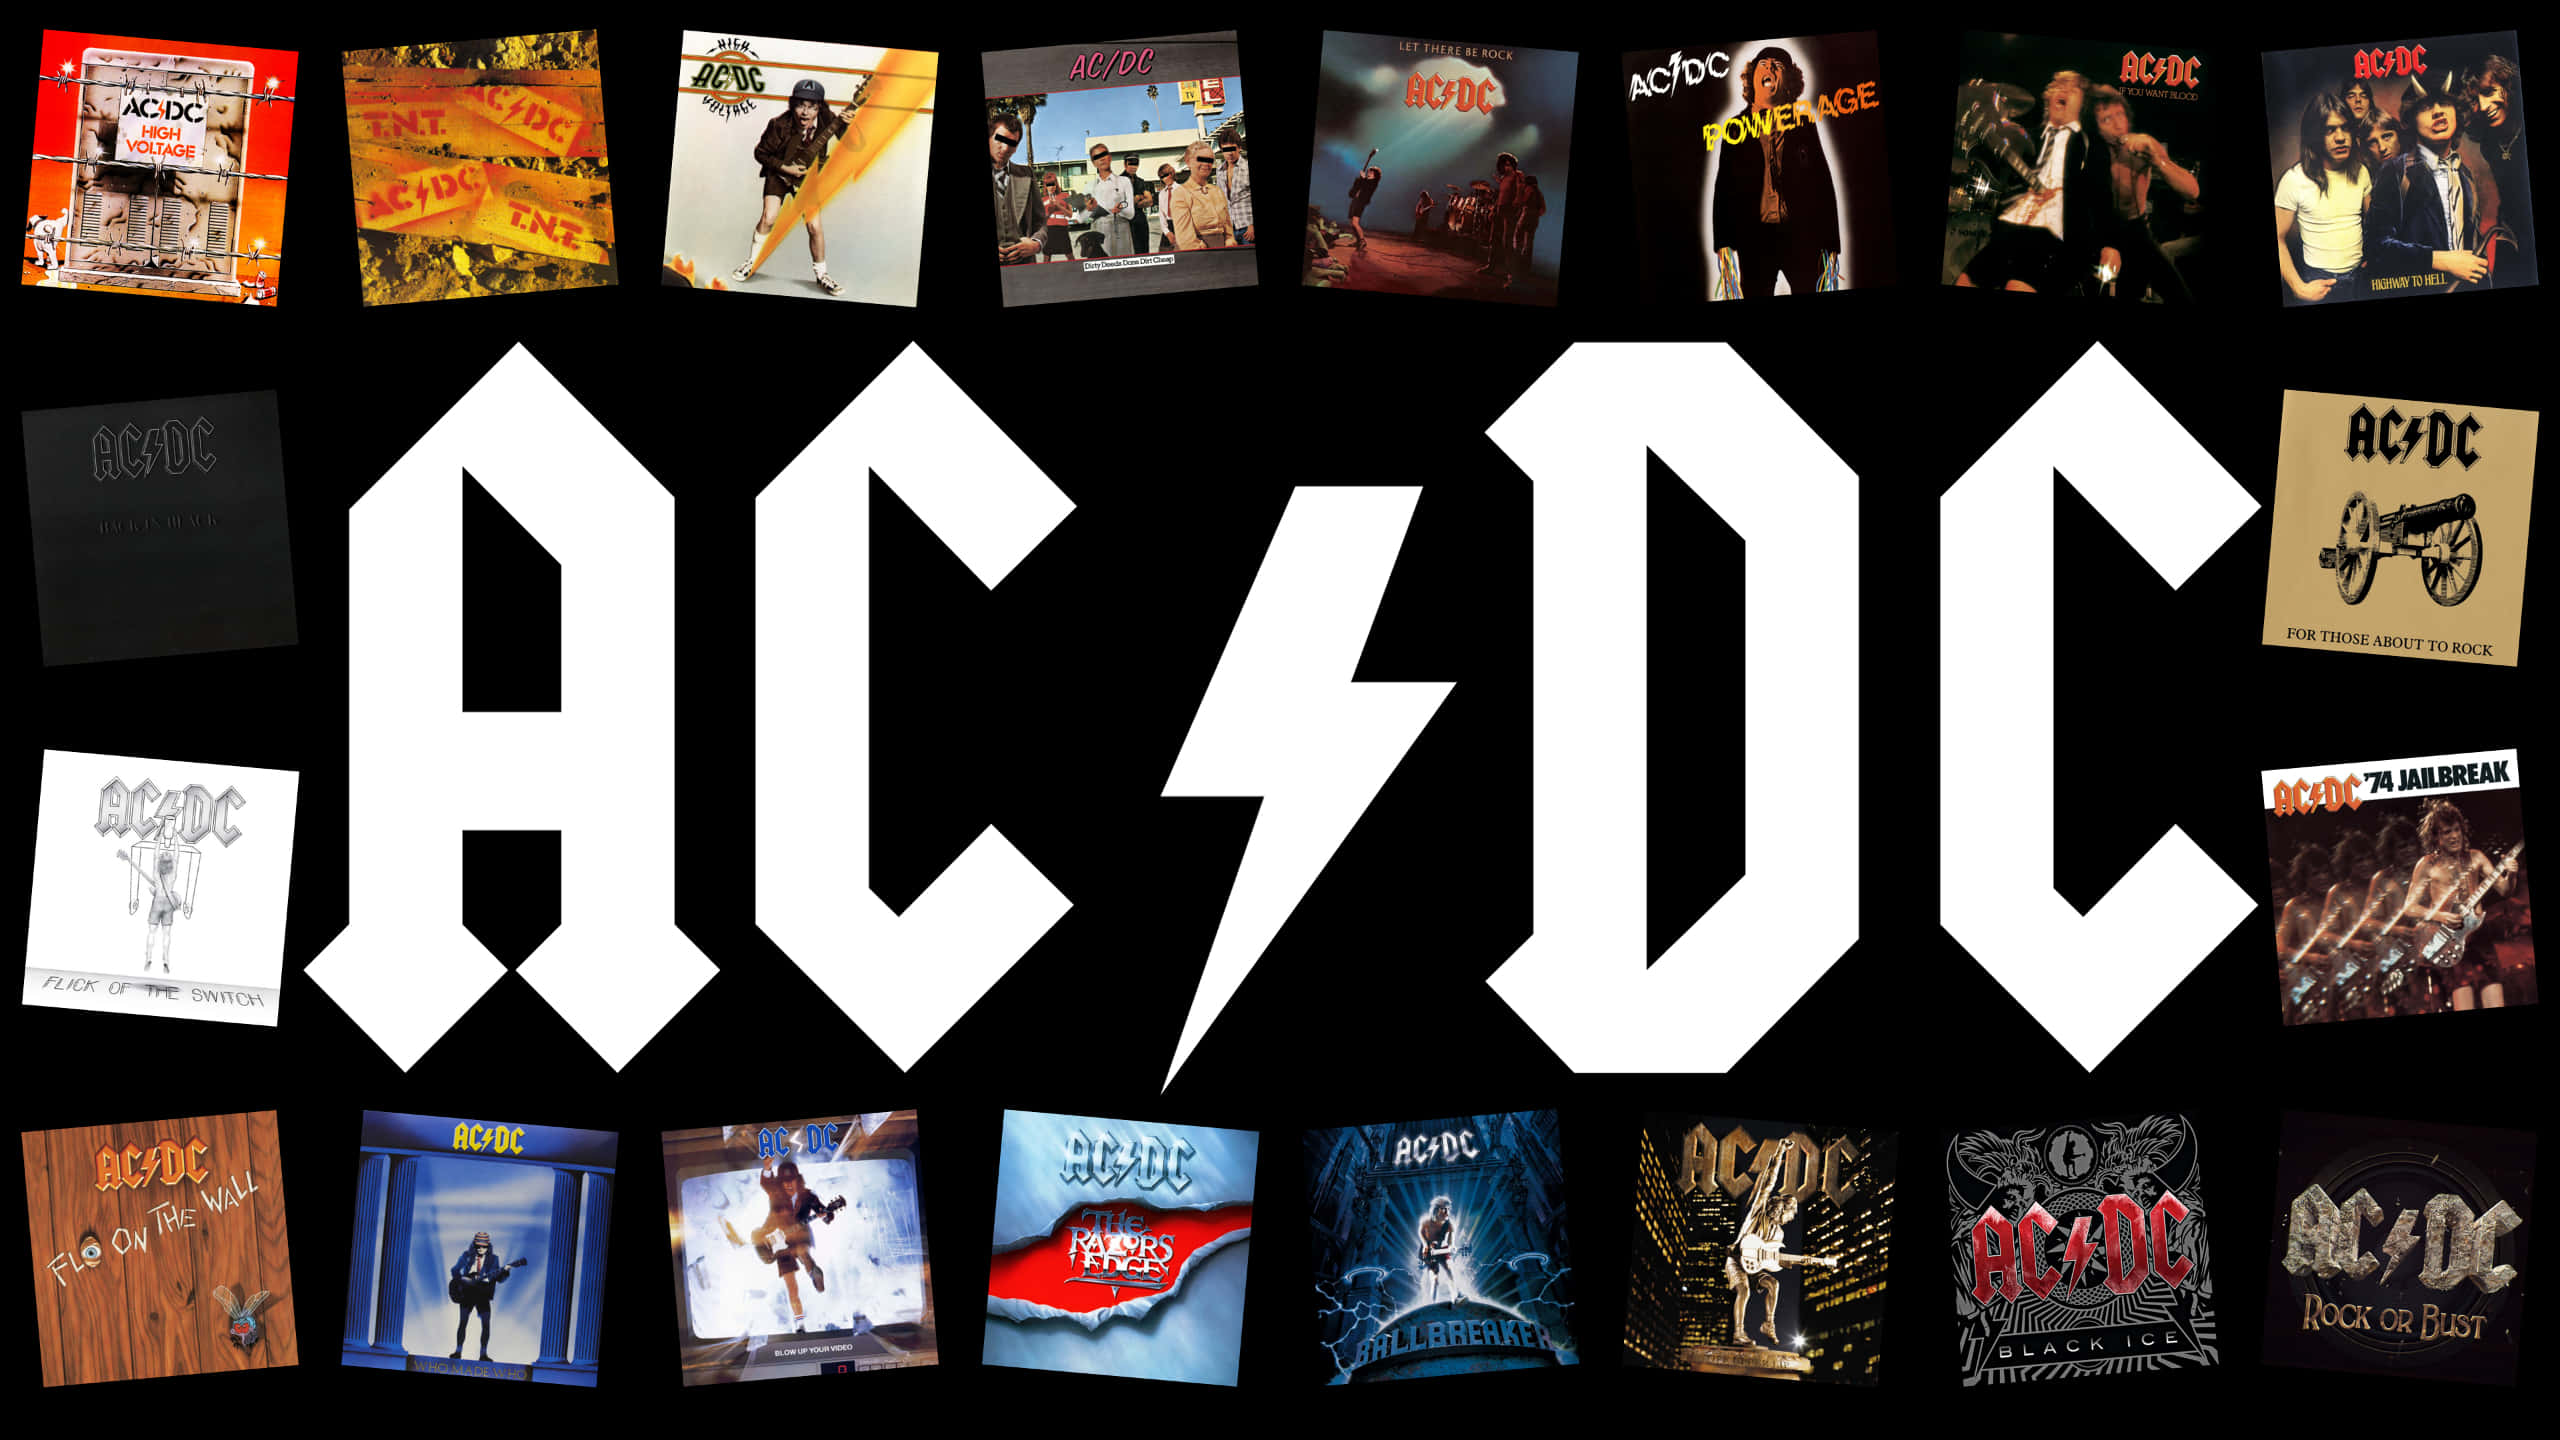 Download Iconic AC/DC Band in Action on Stage Wallpaper | Wallpapers.com